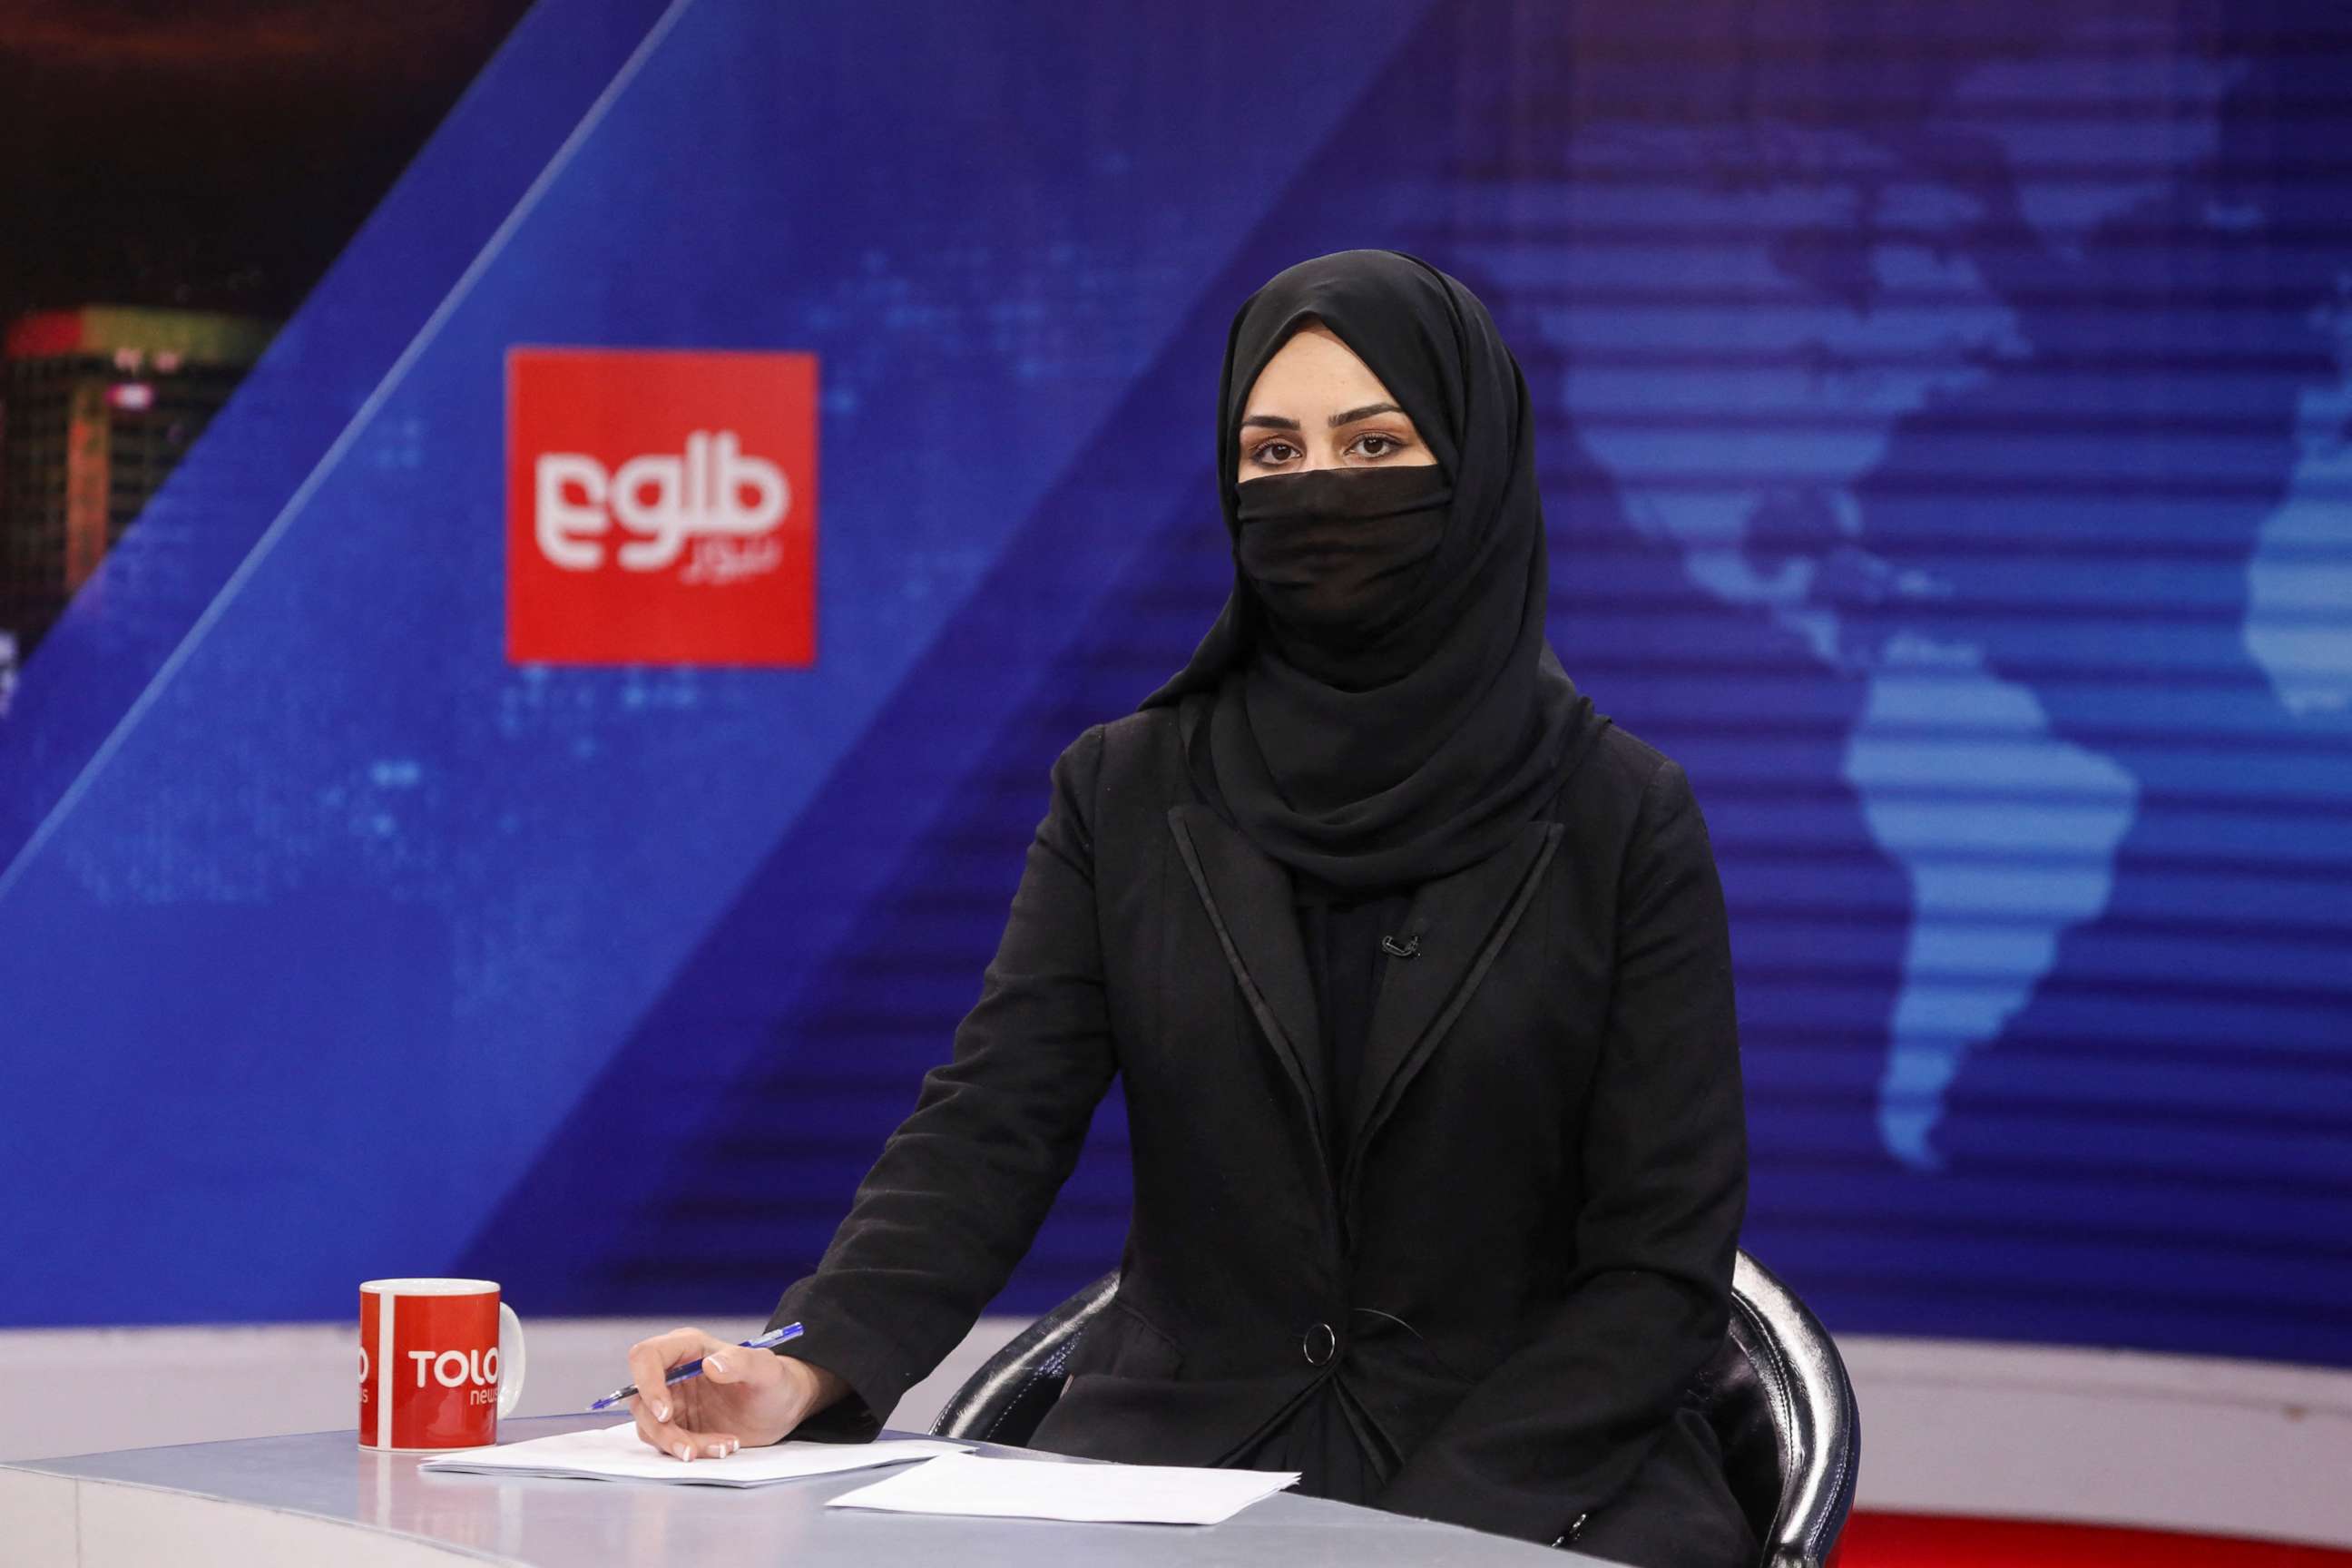 PHOTO: A female presenter for Tolo News, Khatereh Ahmadi, works in a newsroom while covering her face, at Tolo TV station in Kabul, Afghanistan, May 22, 2022.